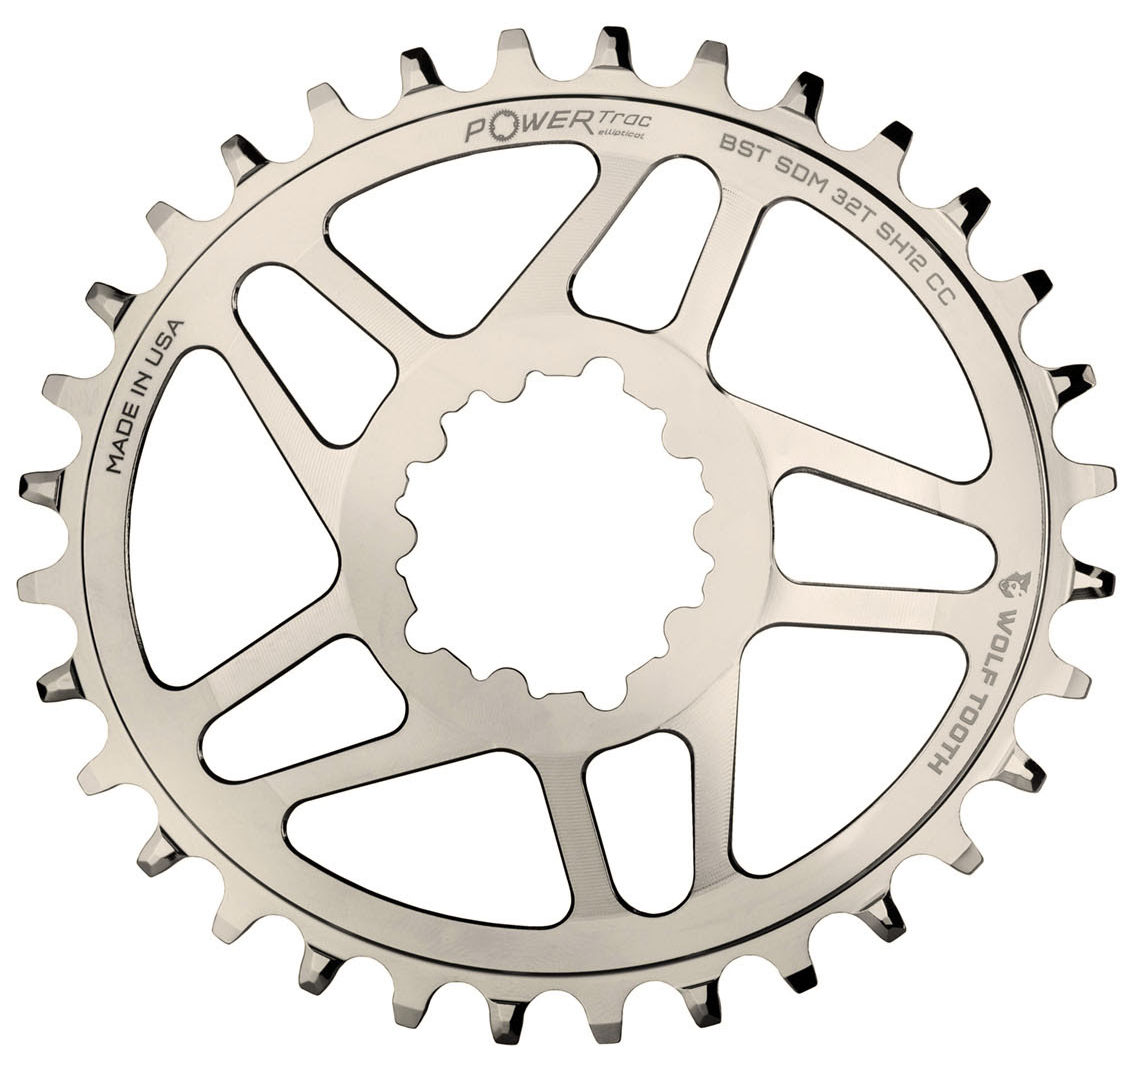 Nickel plated WTC chainrings are a perfect match for Cane Creek eeWings cranks, XTR